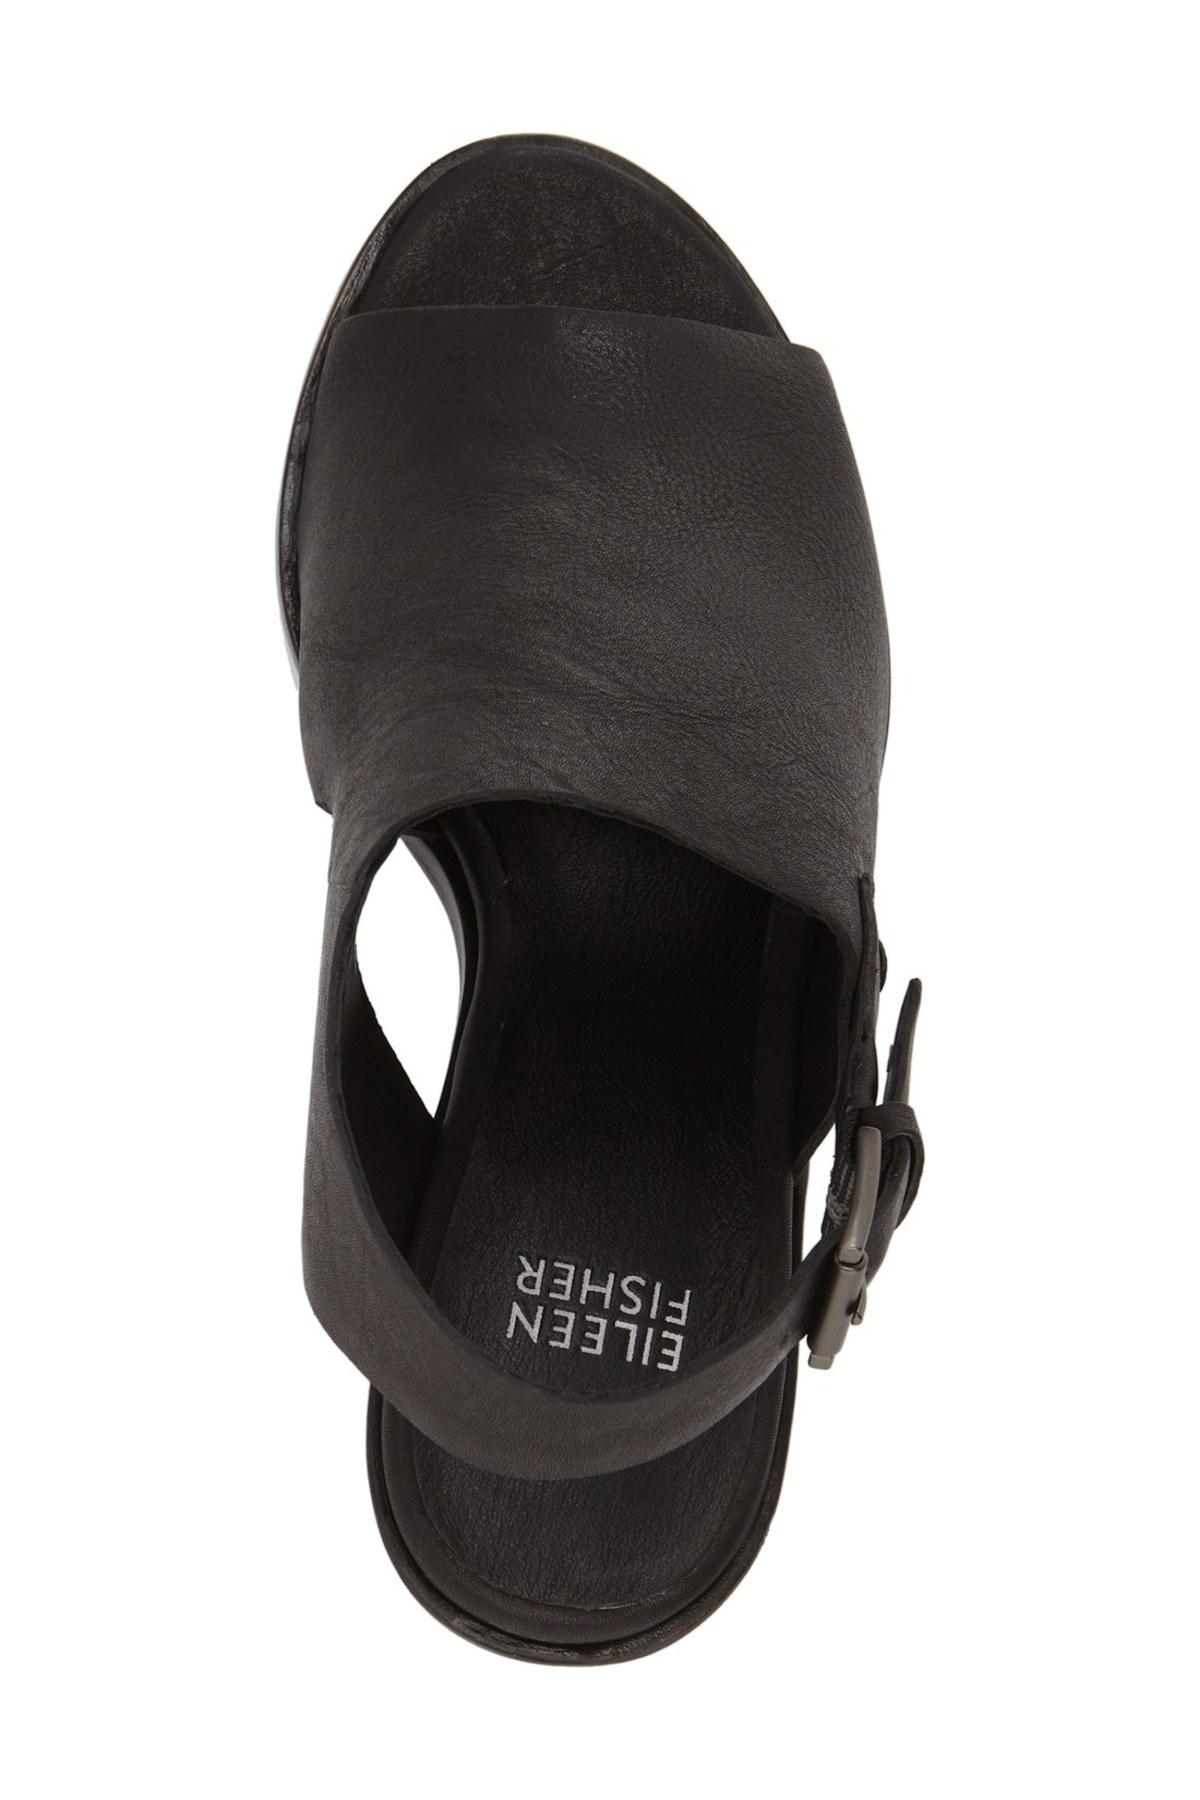 Eileen Fisher Leather 'glance' Sandal in Black - Lyst